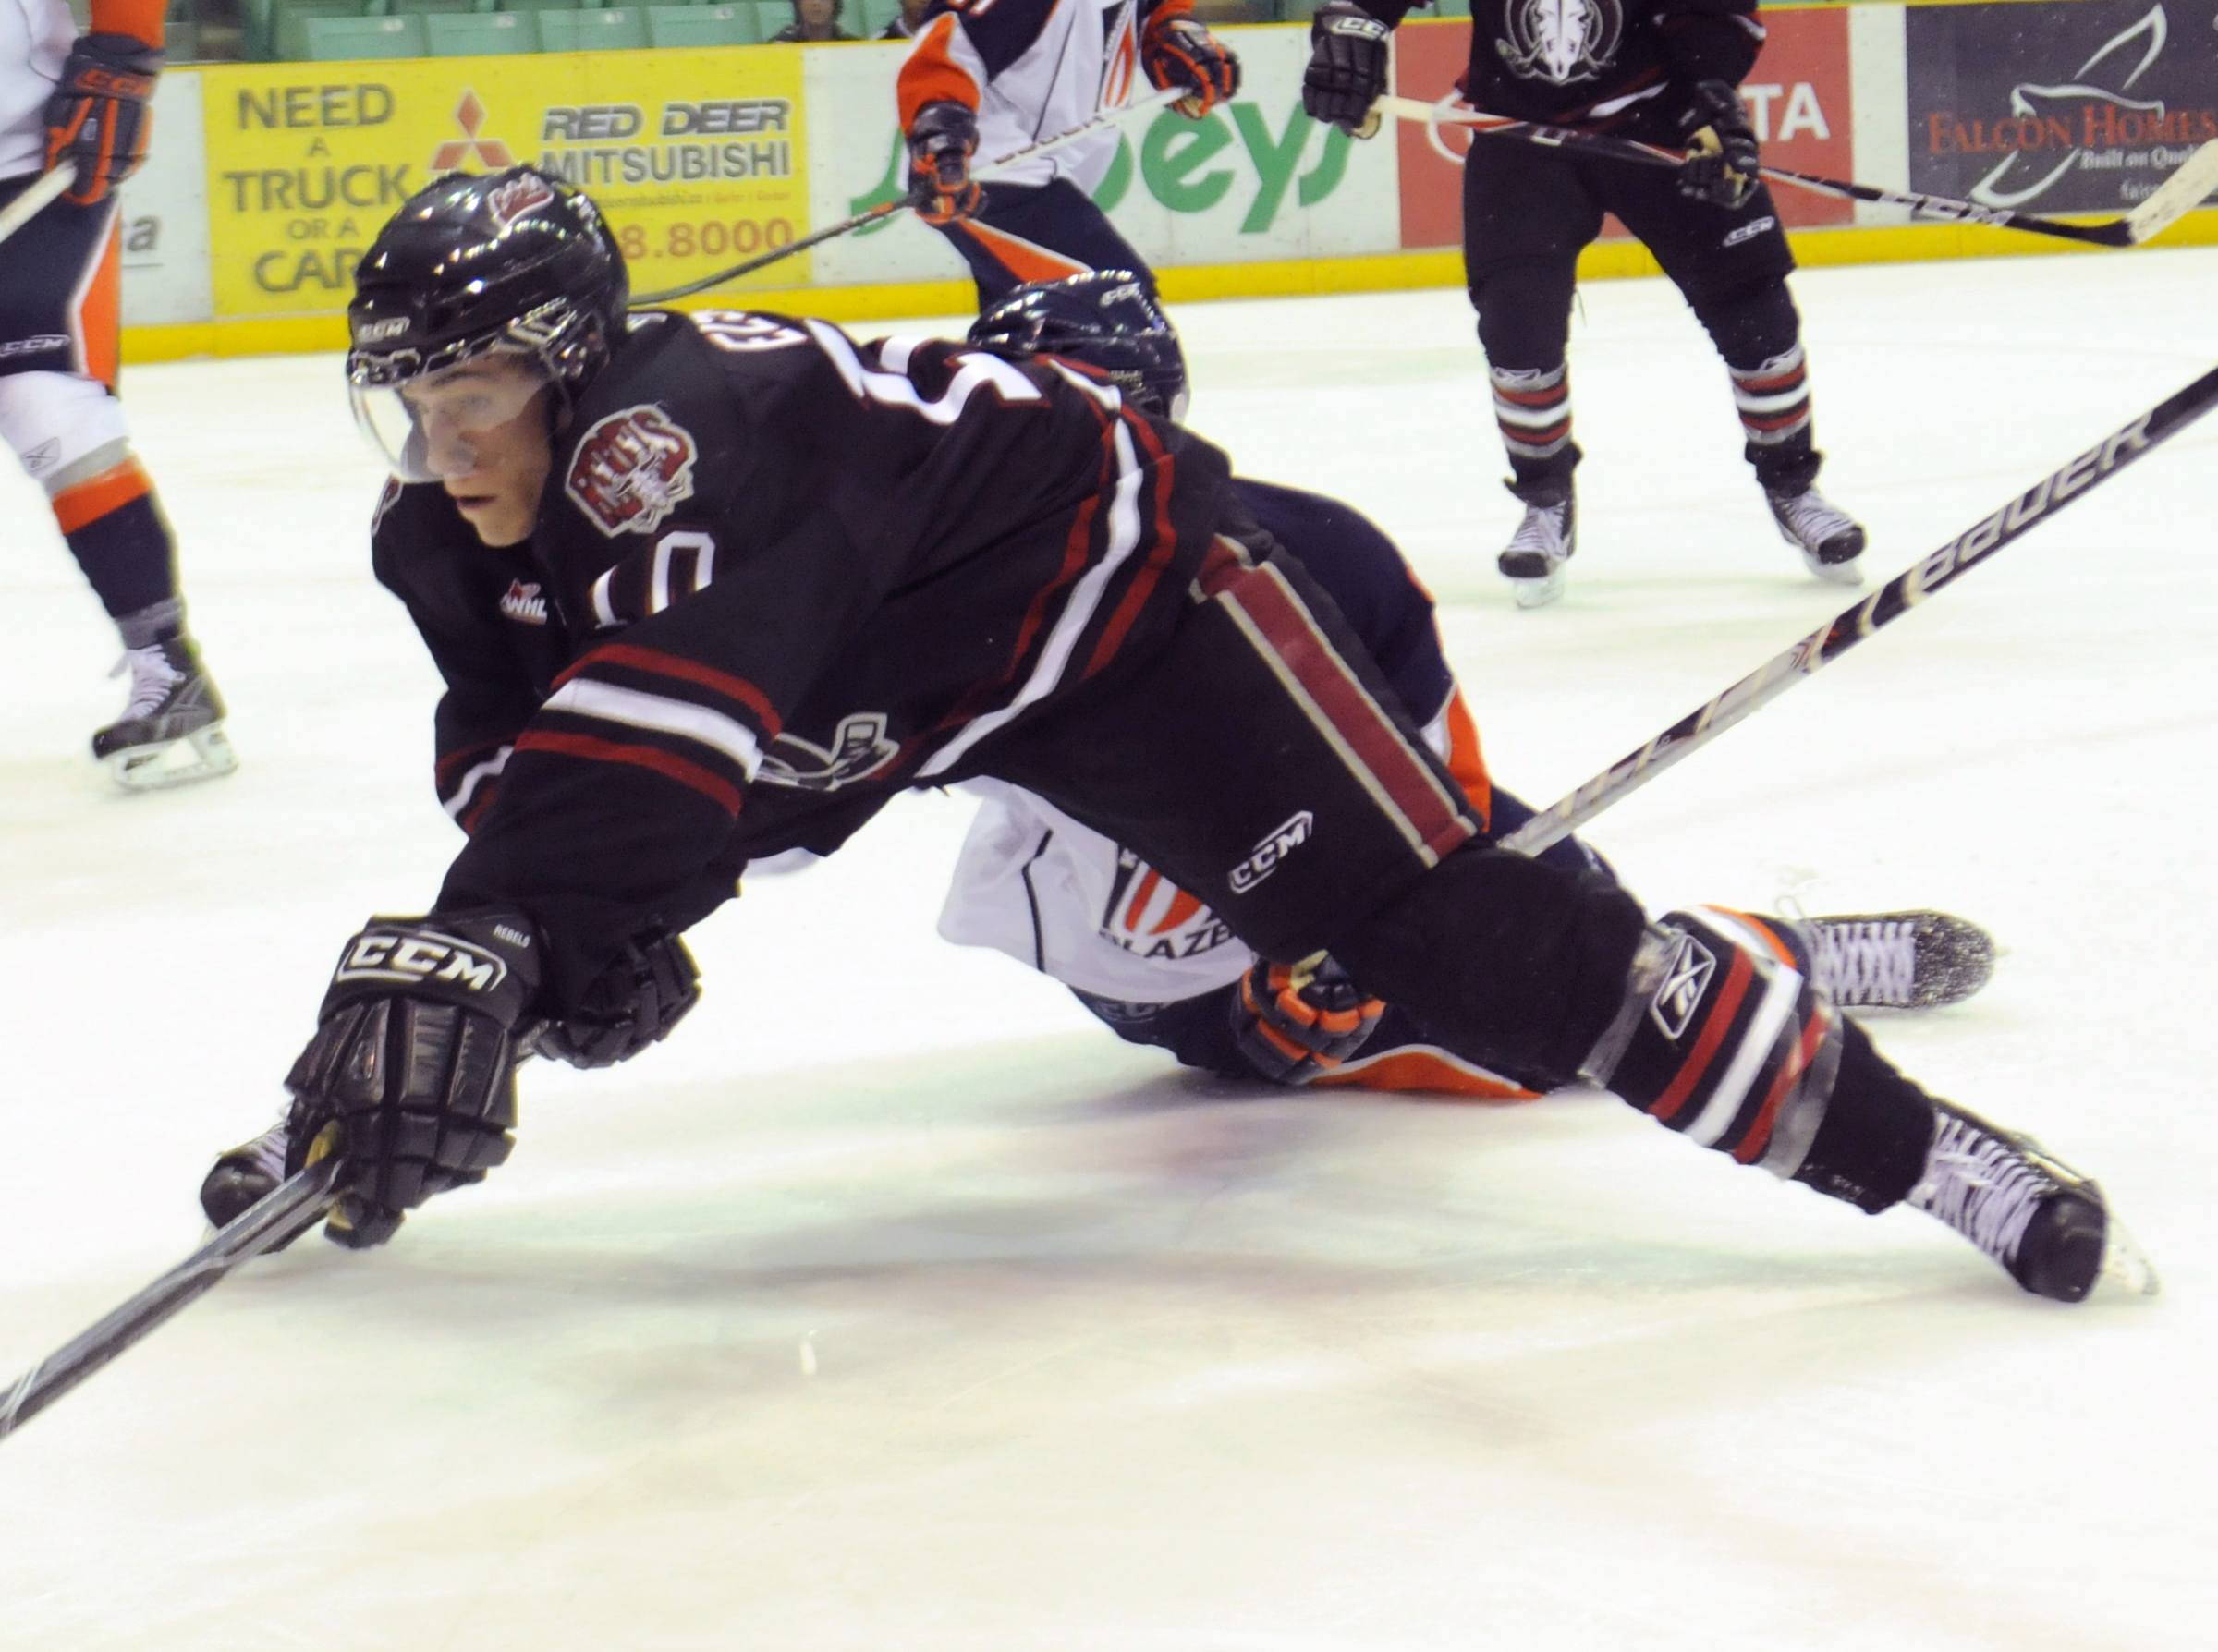 DIVE- Turner Elson of the Red Deer Rebels dives for the puck during WHL action Wednesday evening against Kamloops. The Rebels fought a tough battle but lost 1-0.